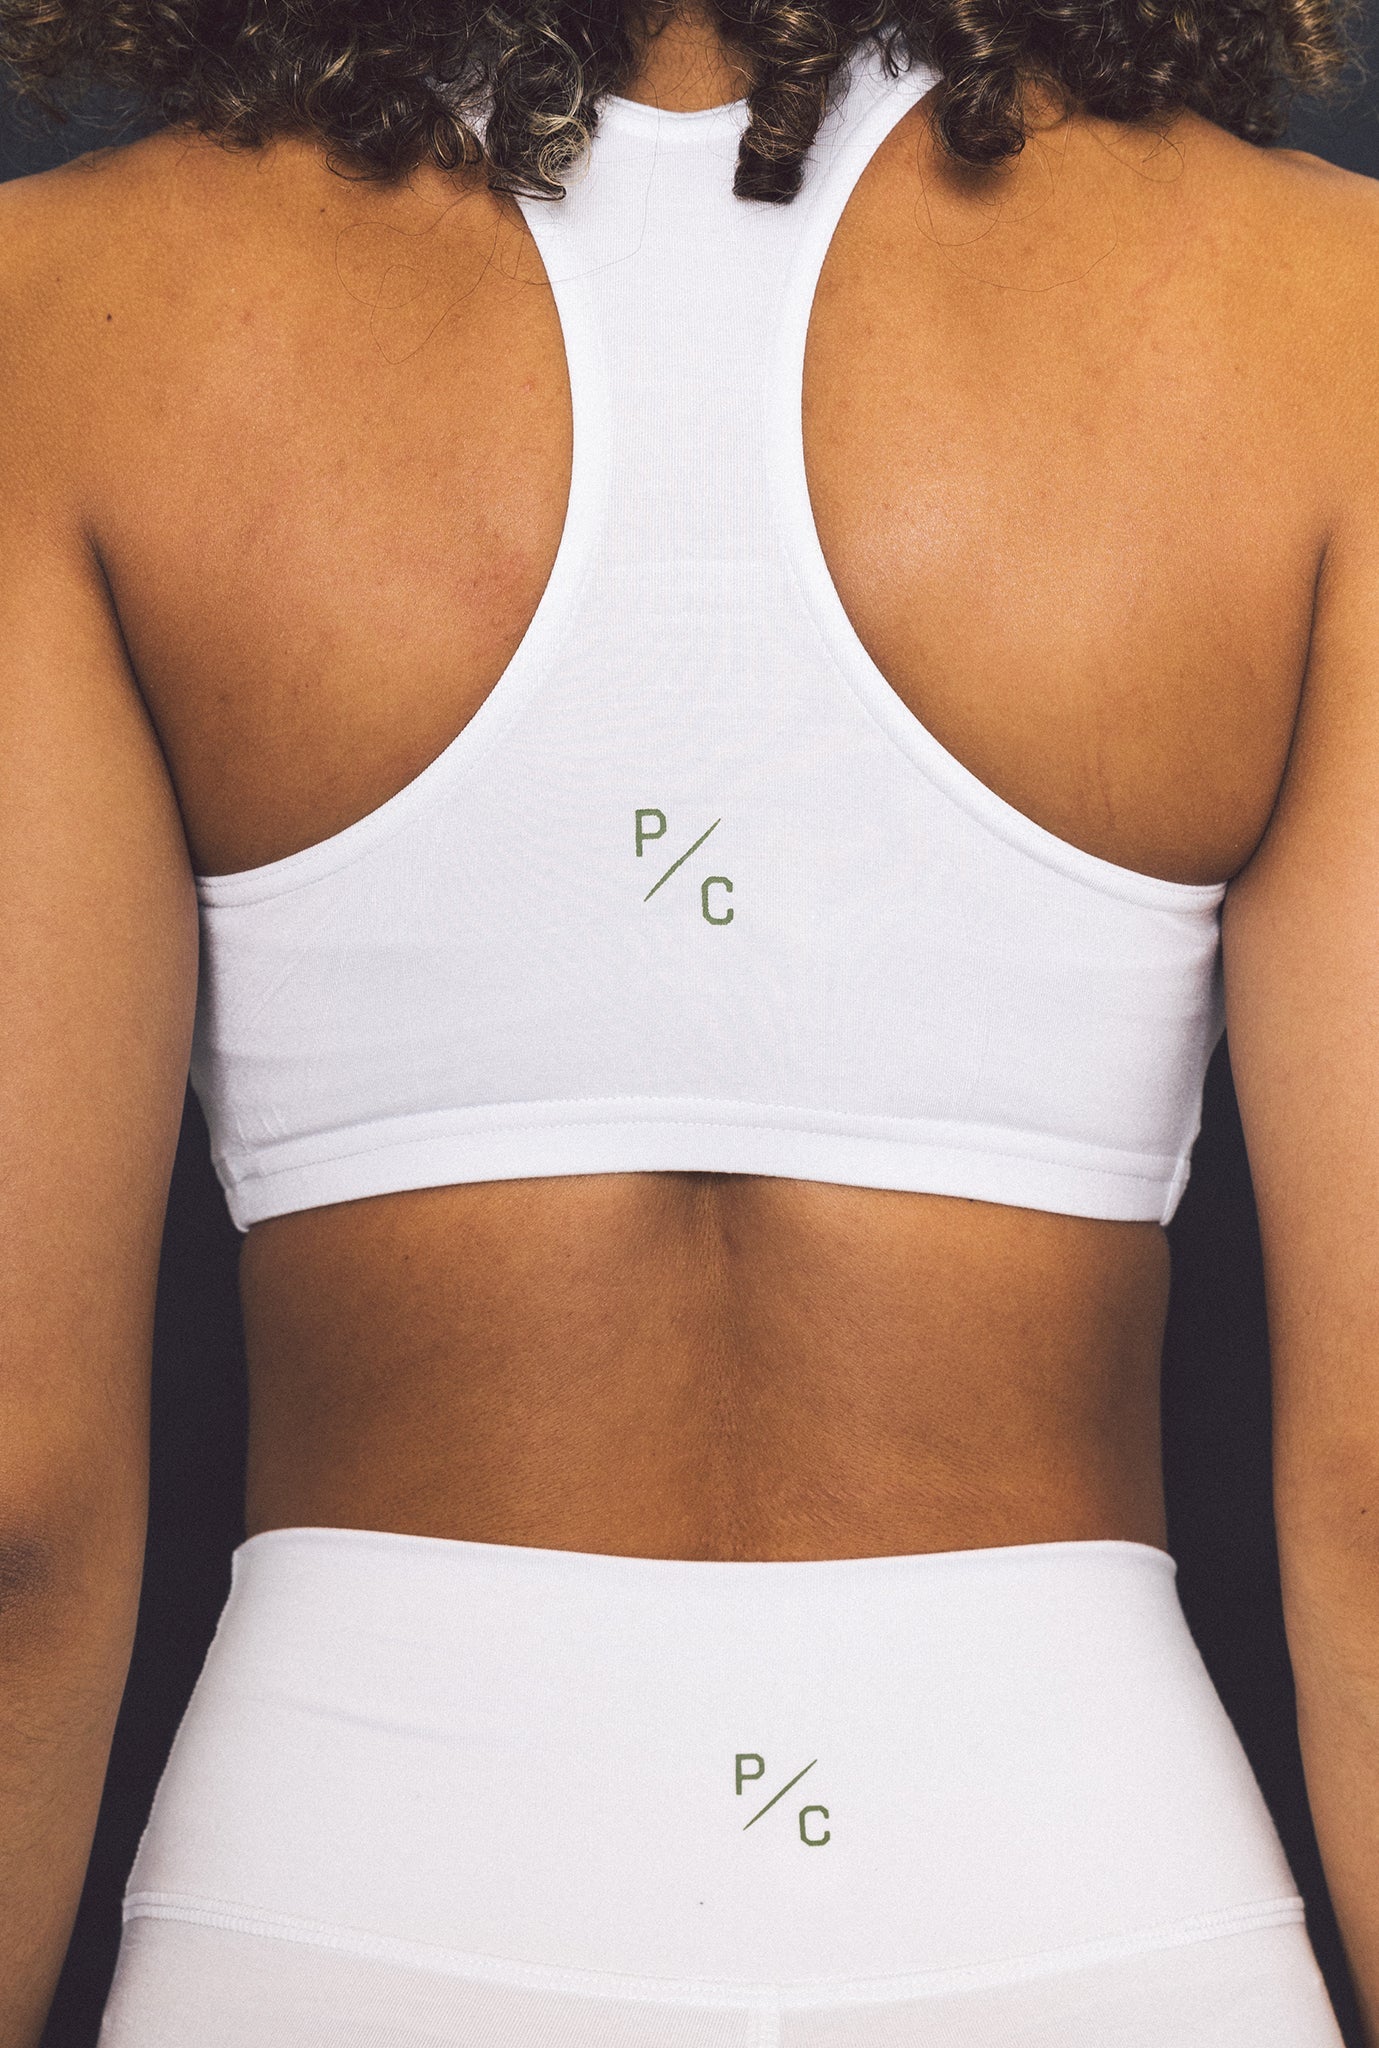 Protect Your Energy Movement™ Bra Top - White